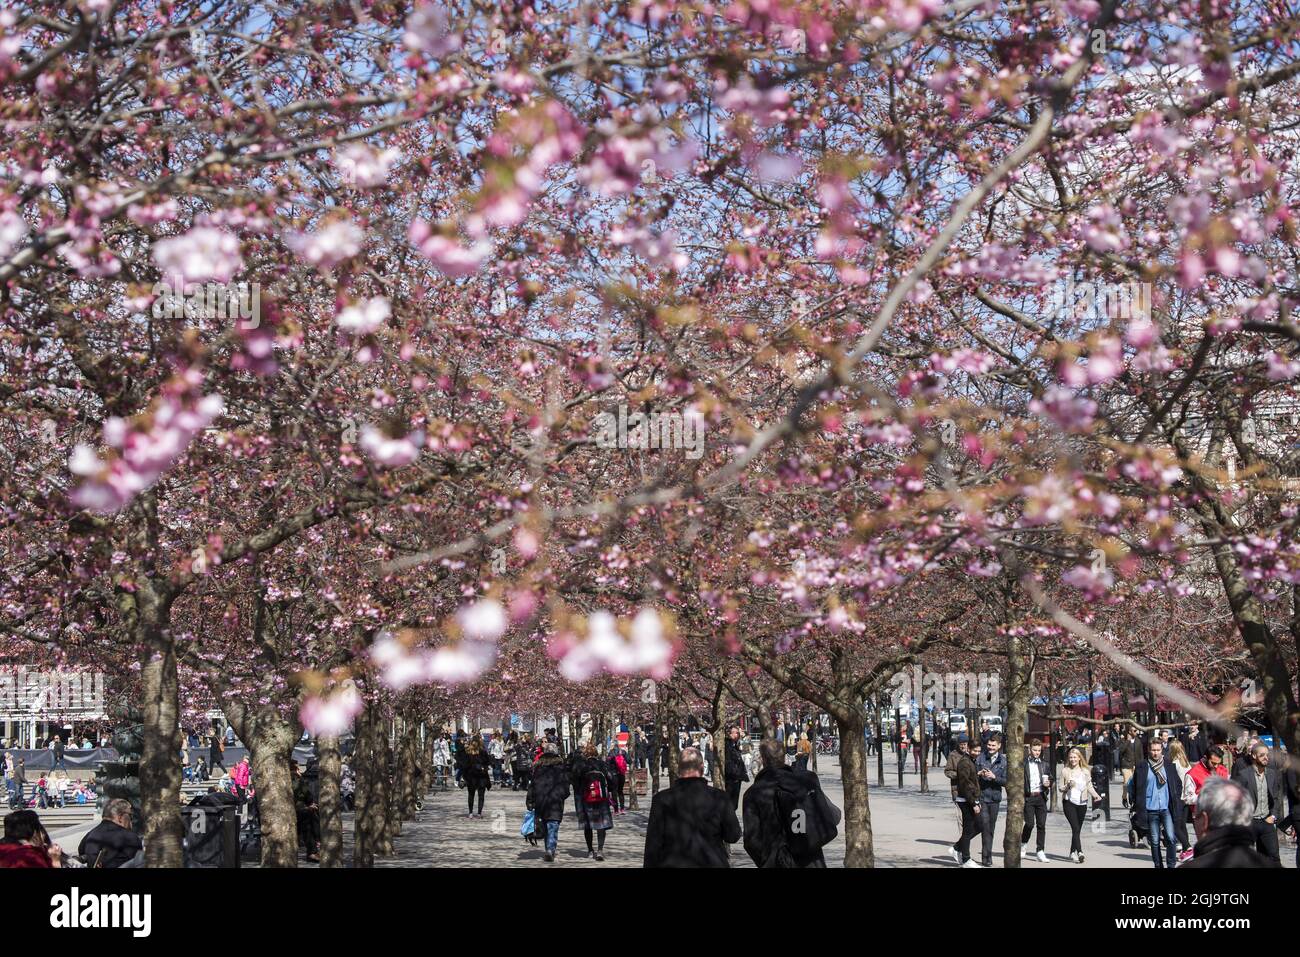 People stroll under blooming cherry trees in Kungstradgarden park in Stockholm, Sweden, on April 15, 2016. Weather forecasts predict changeable weather conditions with about 10 degrees Celcius in Stockholm during the weekend. Photo: Henrik Montgomery / TT / code 10060 Stock Photo